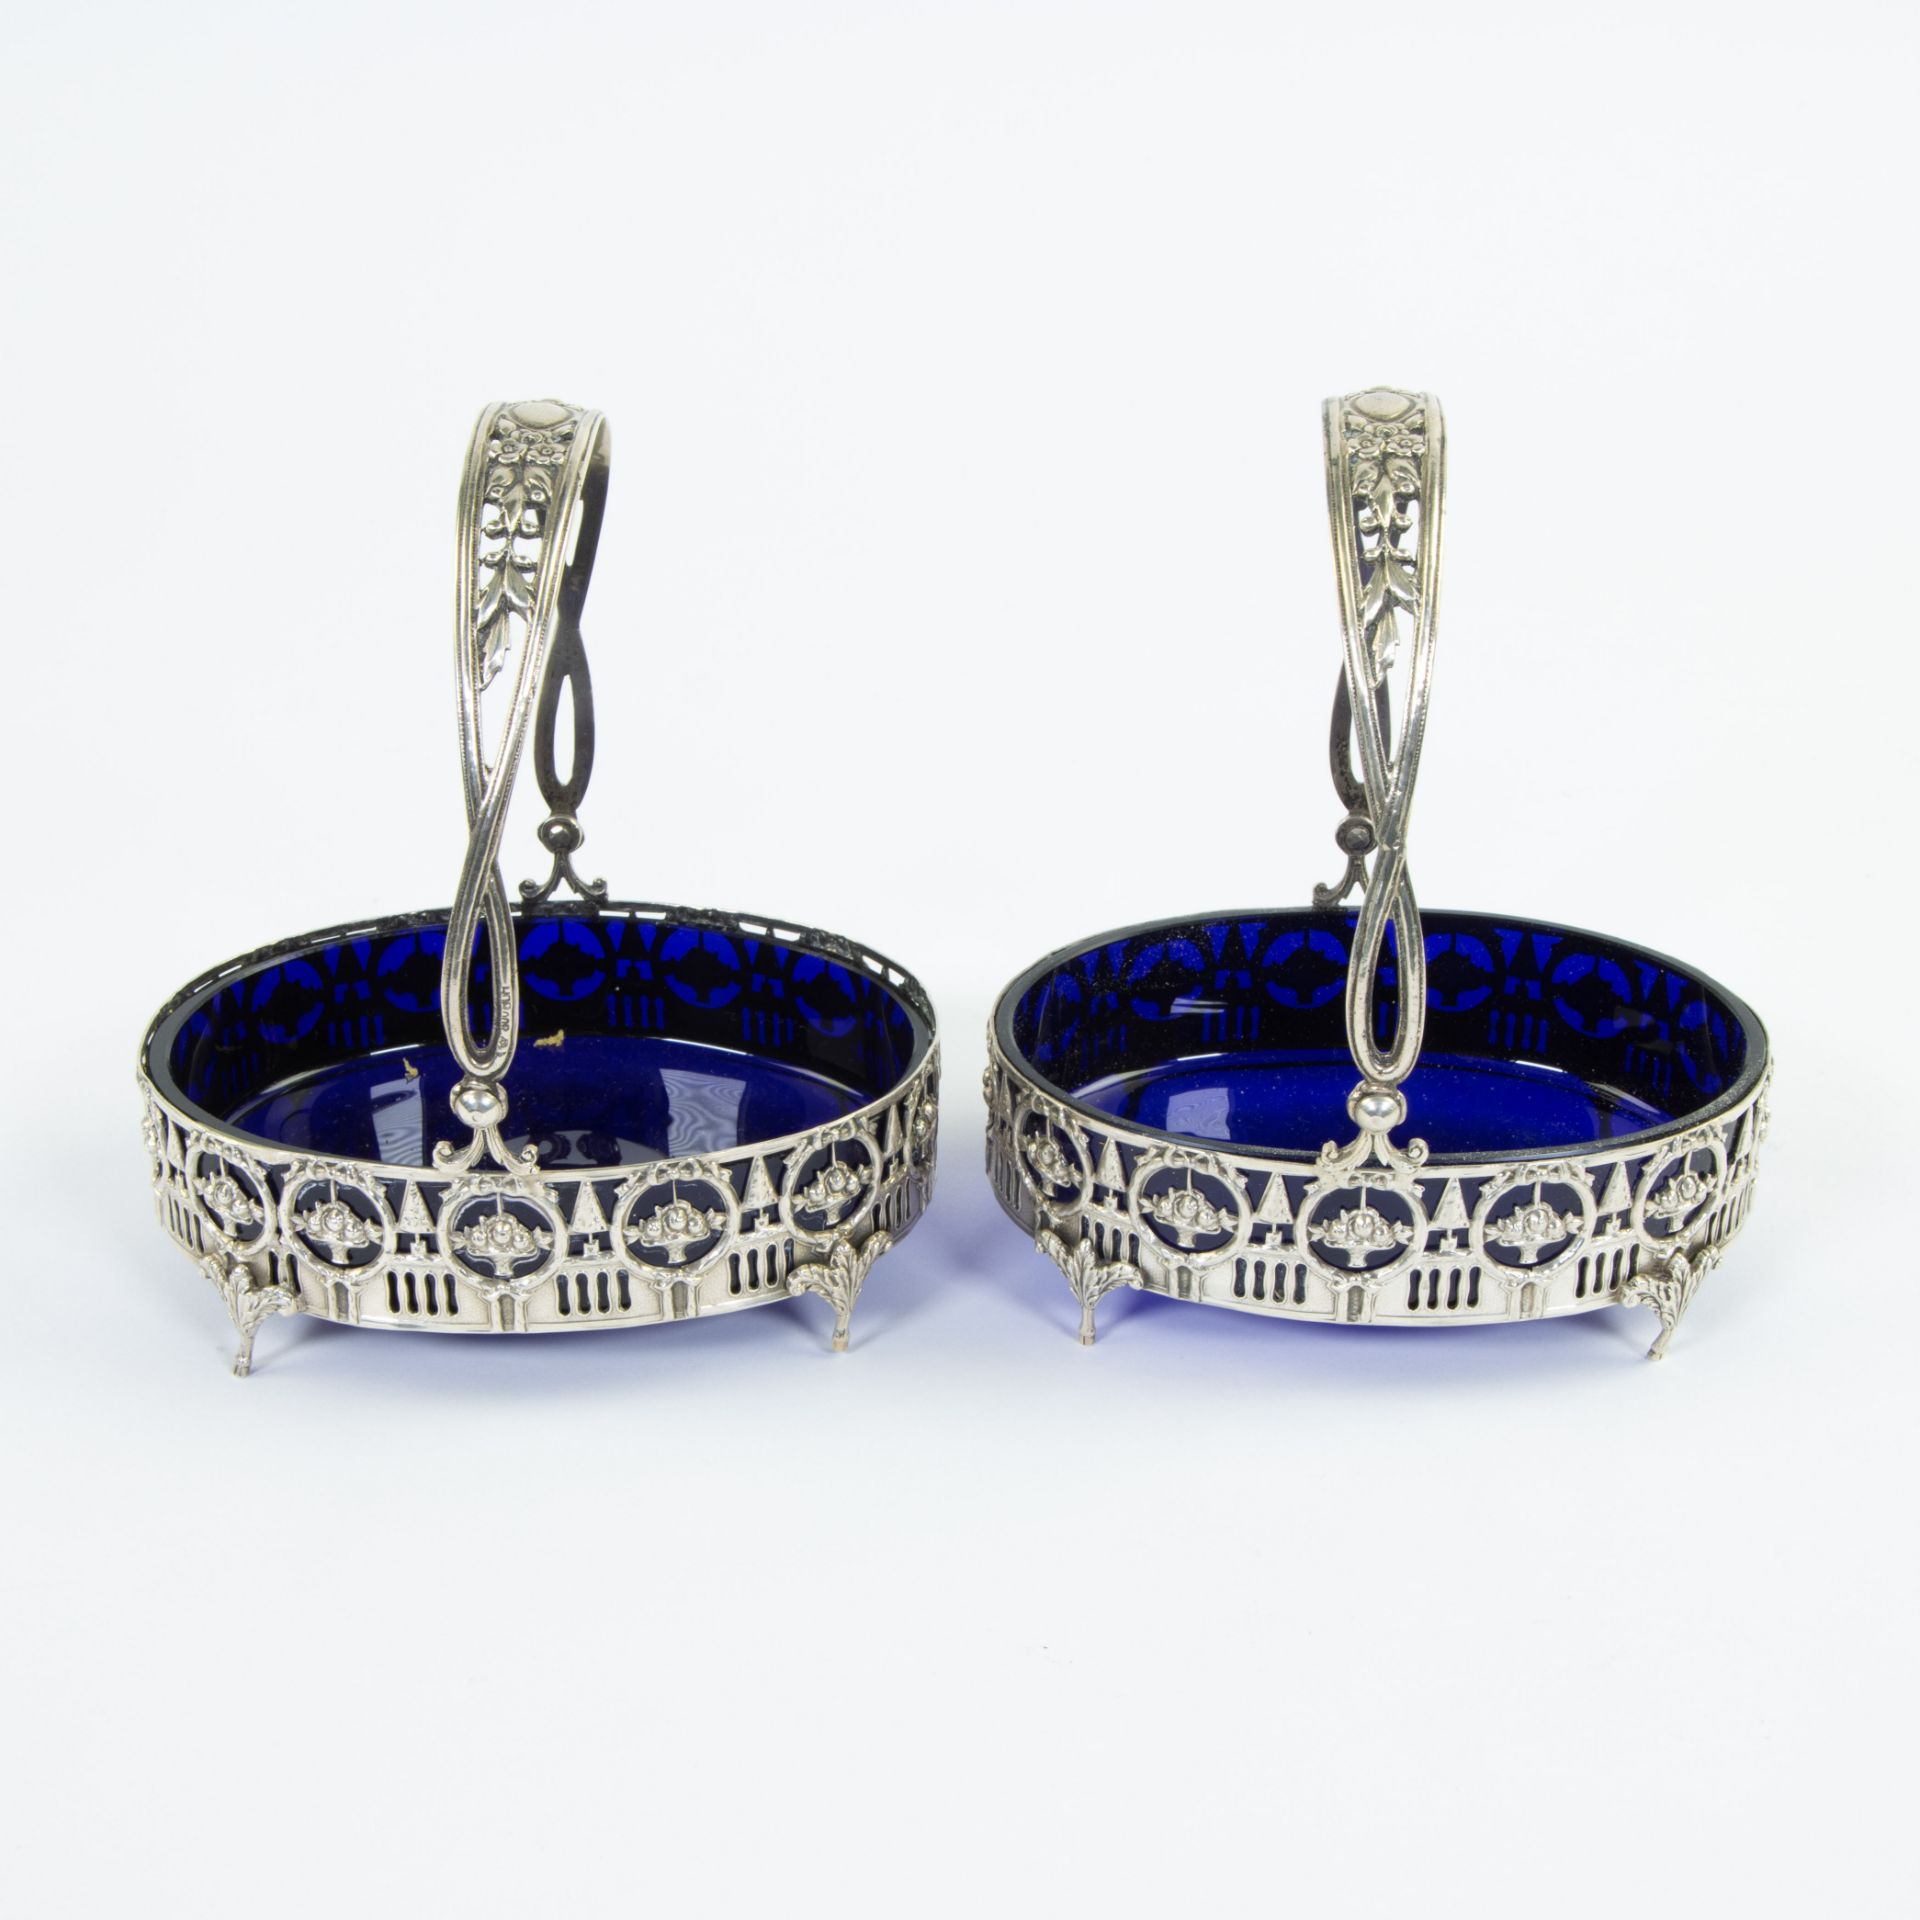 2 solid silver salt baskets beautifully ornamented in Louis XVI style with blue glasses